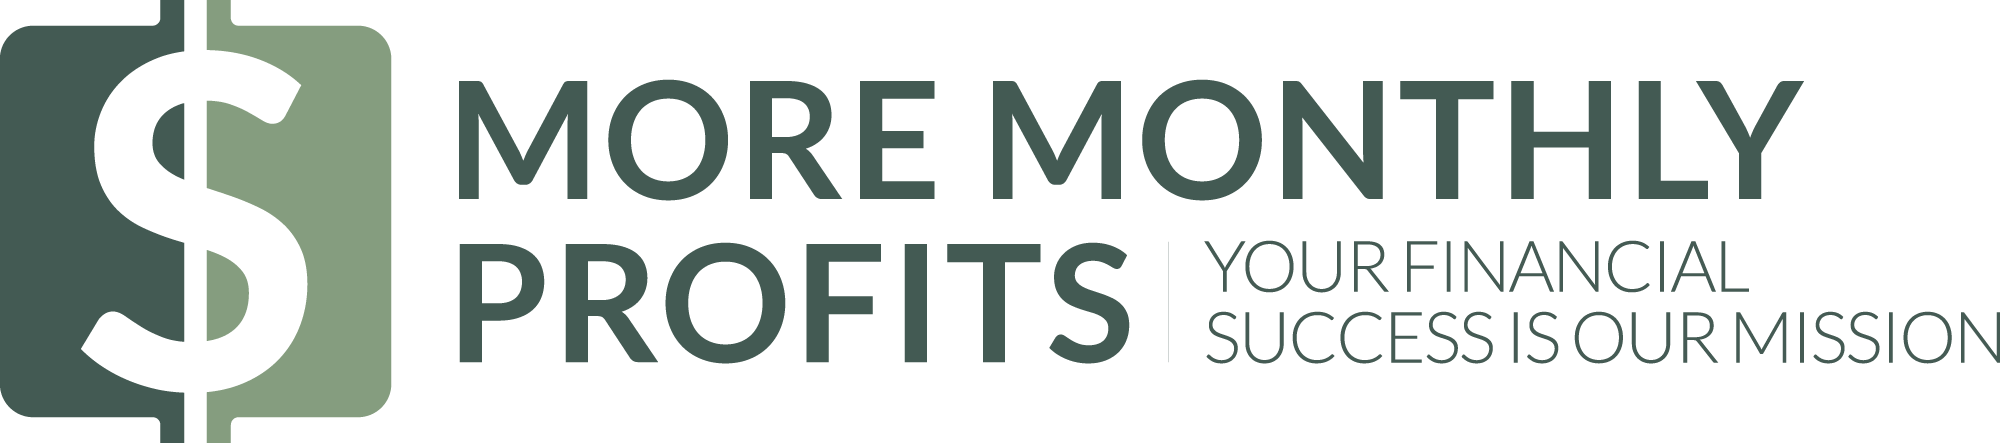 More Monthly Profits